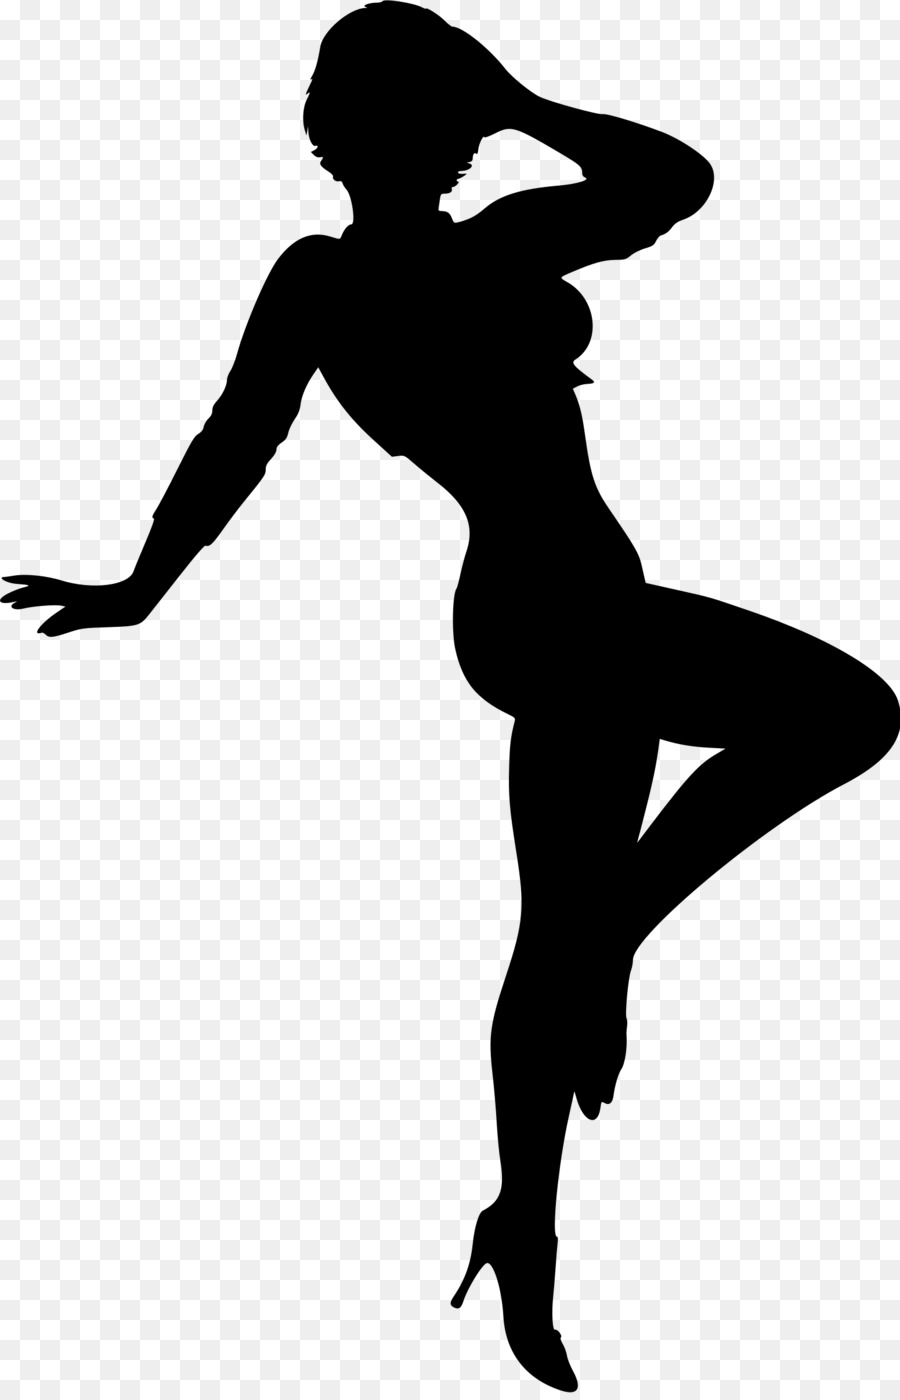 Female Silhouette Woman Clip art - Silhouette png download - 1551*2400 - Free Transparent Female png Download.